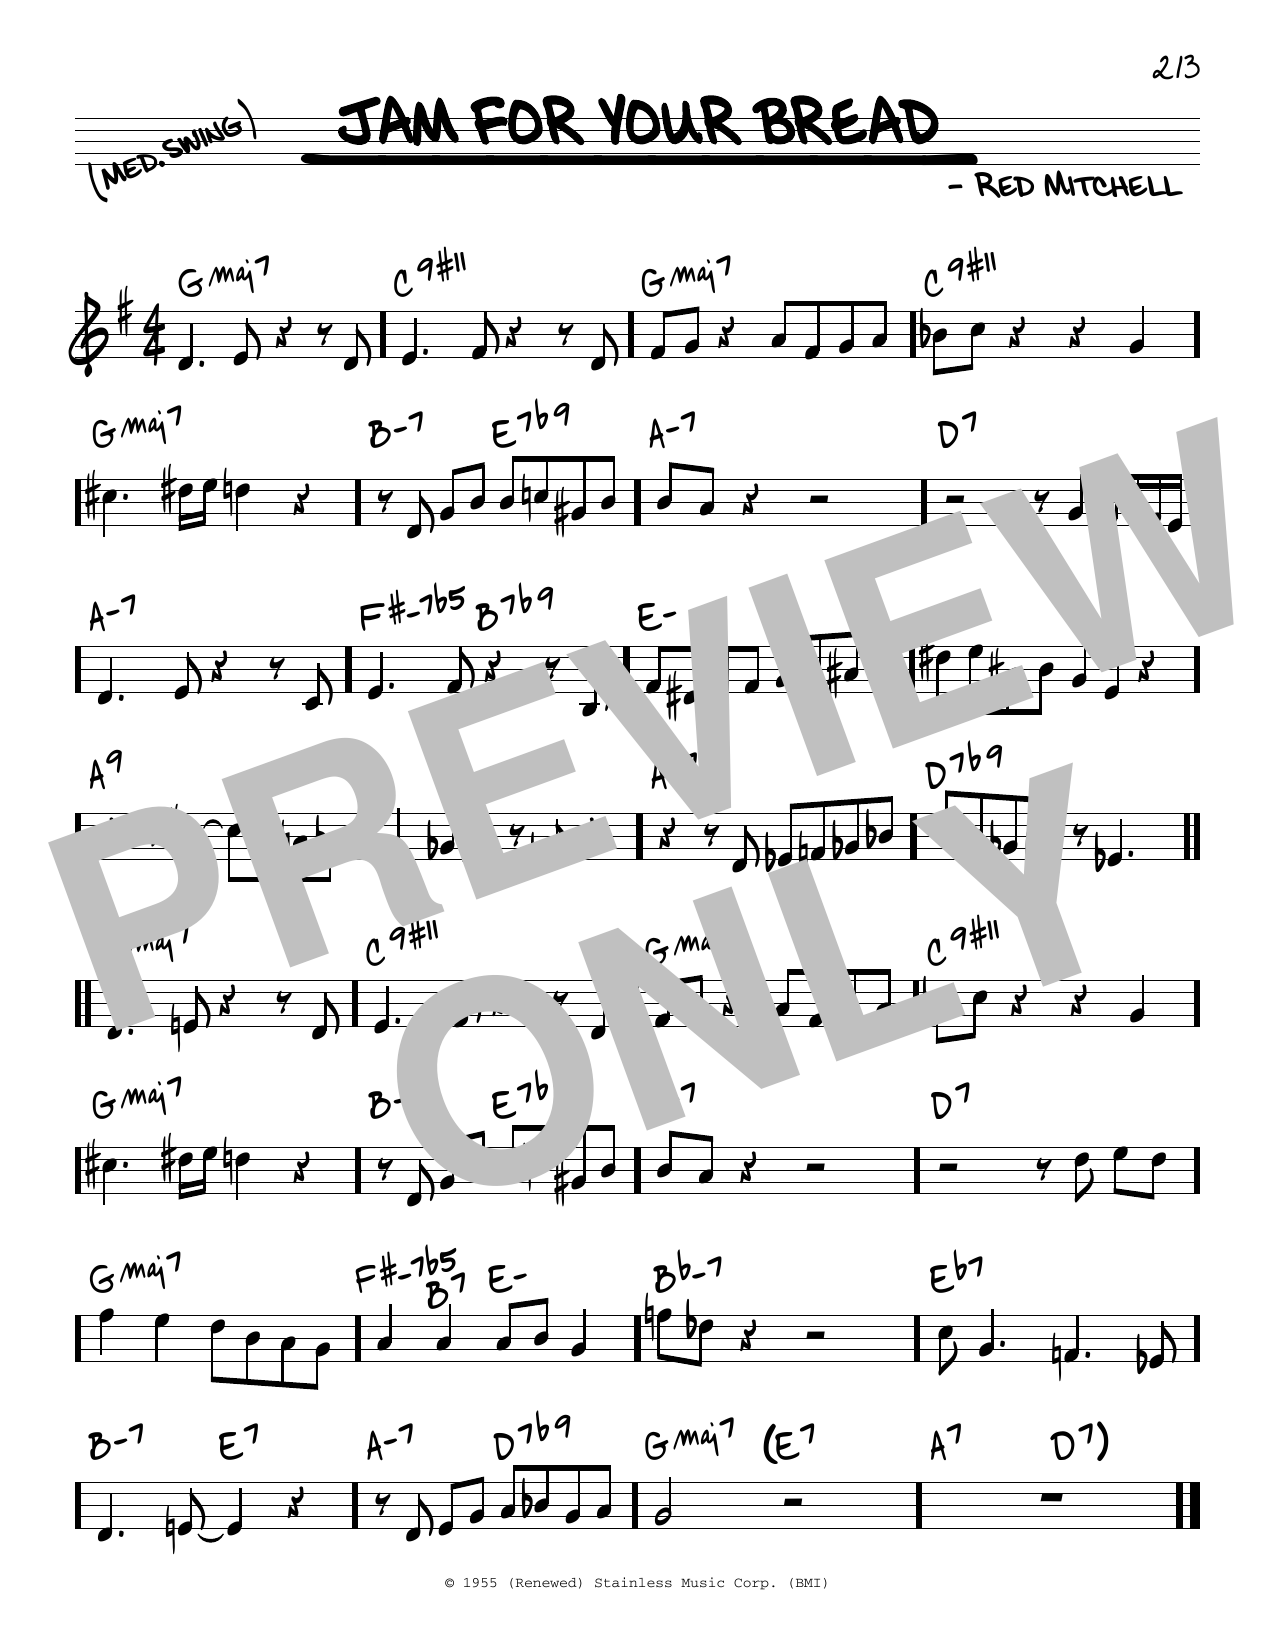 Download Red Mitchell Jam For Your Bread Sheet Music